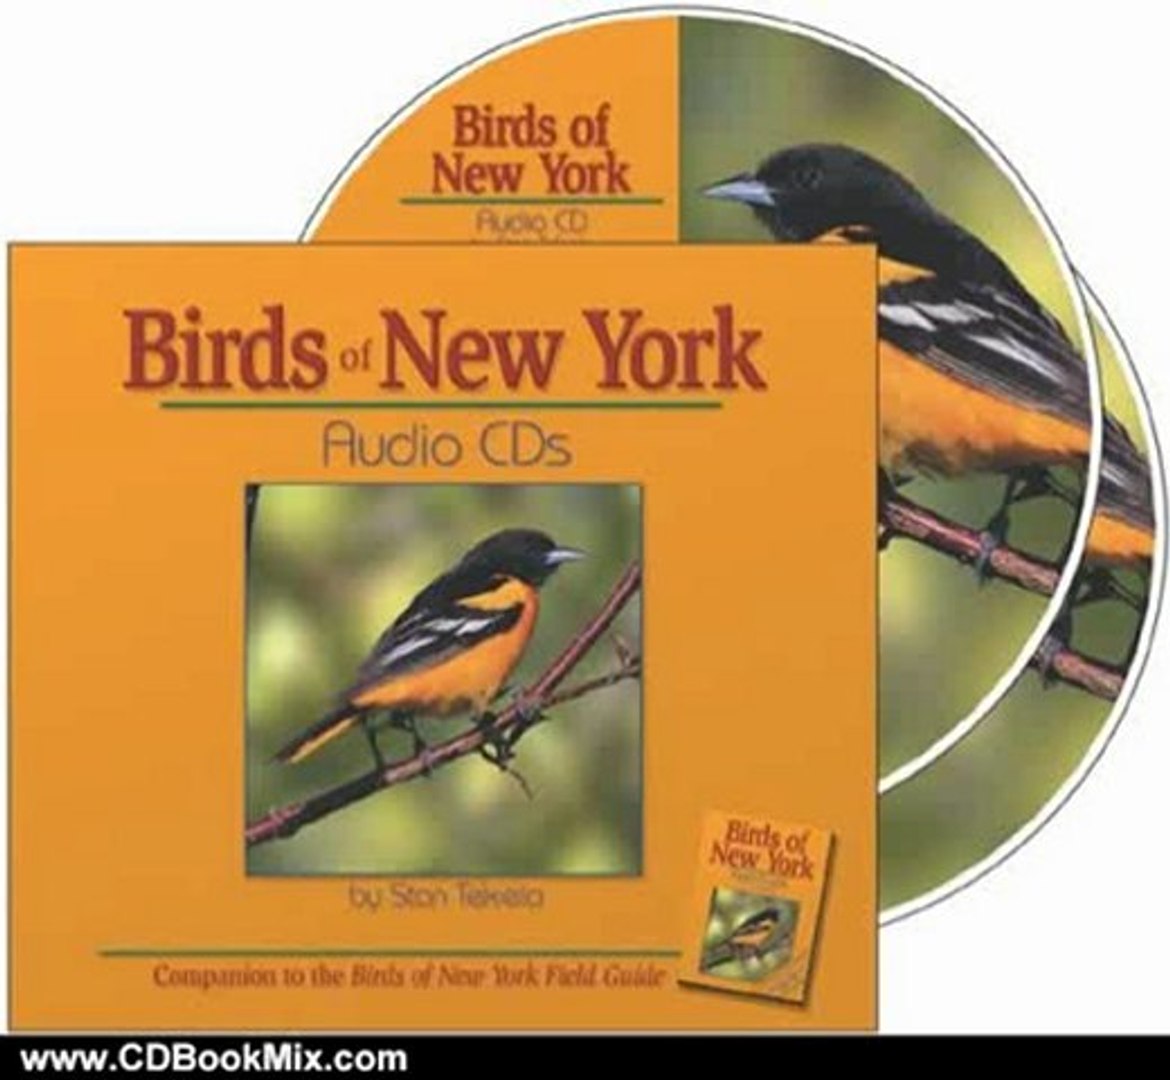 Cd Book Review Birds Of New York Audio Cds Companion To The Birds Of New York Field Guide By Stan Tekiela Video Dailymotion